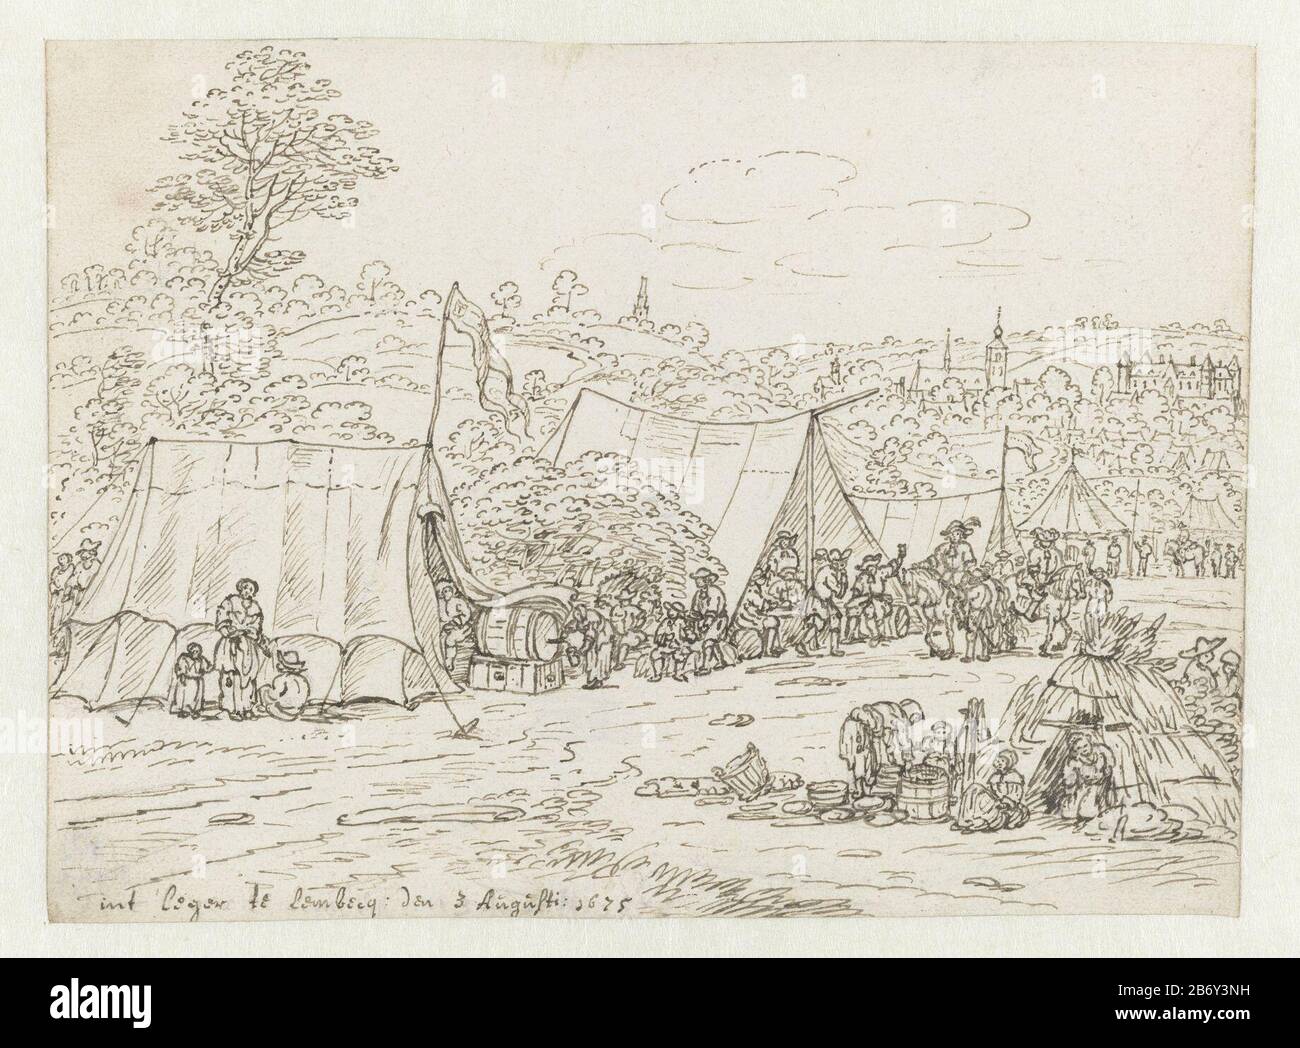 Kampement van het leger van Willem III te Lembeek Encampment of the army of William III in Lembeek Property Type: Drawing Object number: RP-T-1898-A-3663 Manufacturer : artist: Josua de Grave Date: Aug 3 1675 Physical features: pen in brown material: paper Ink Technology : pen Dimensions: h 132 mm × W 180 mm Subject (military) camp with tents names of towns and villages (military) camp with tents names of towns and village: LembeekLembeekWie: William (prince of Orange and king of England, Scotland and Ireland) Stock Photo